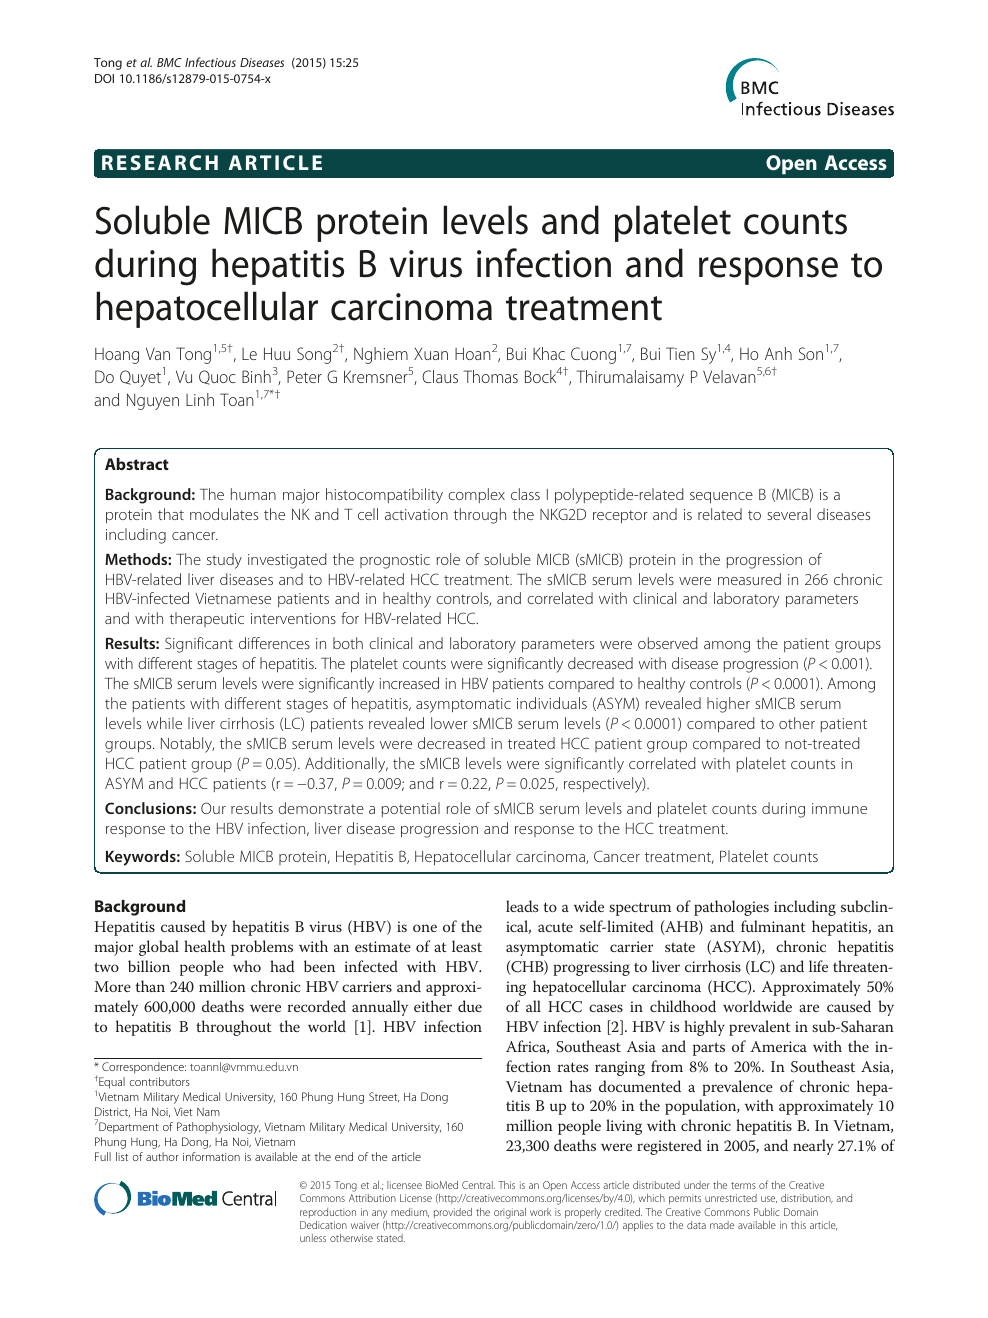 Soluble Micb Protein Levels And Platelet Counts During Hepatitis B